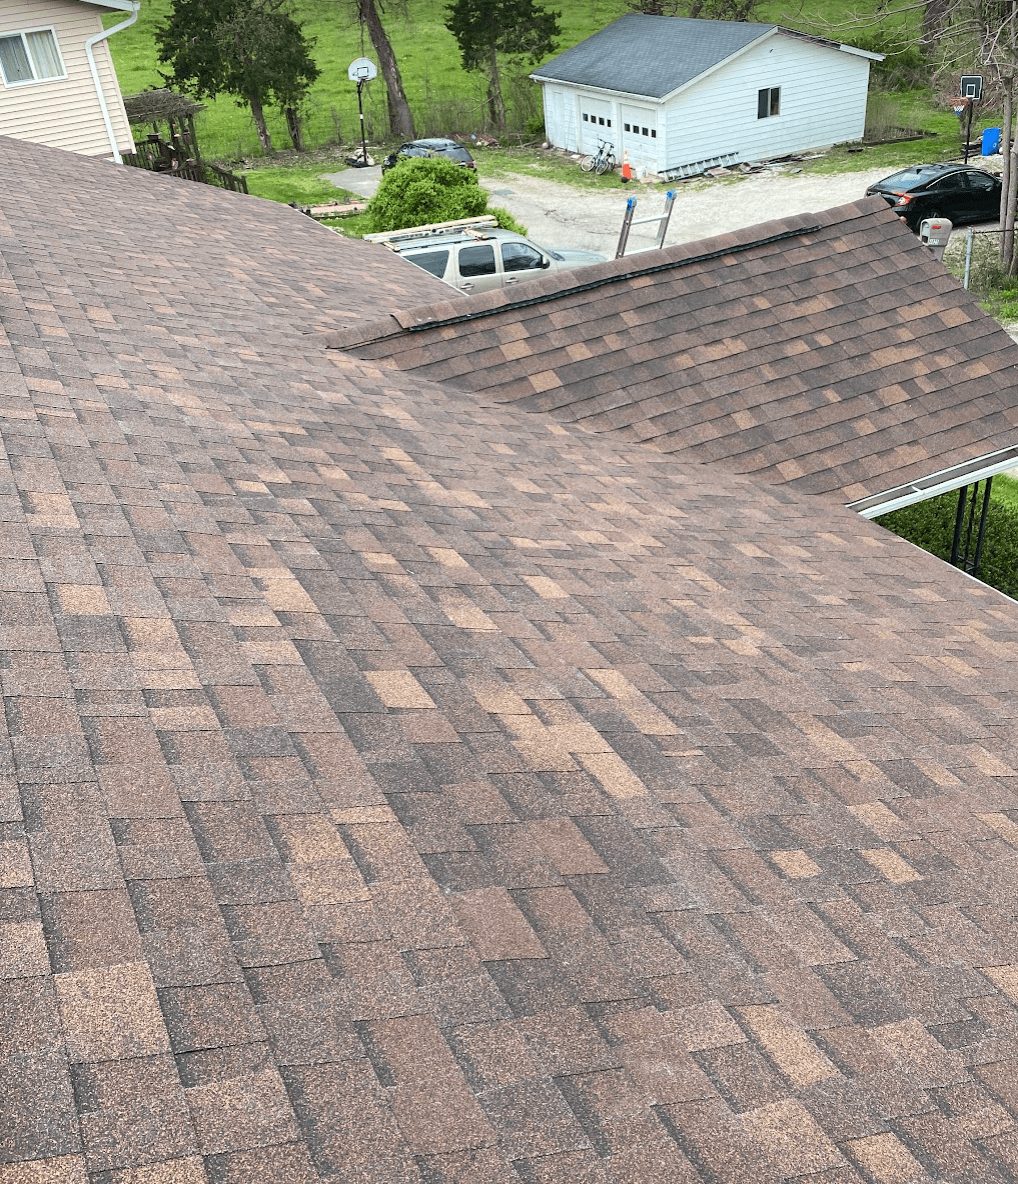 brownwood shingles installed in home trudefinition duration owens corning